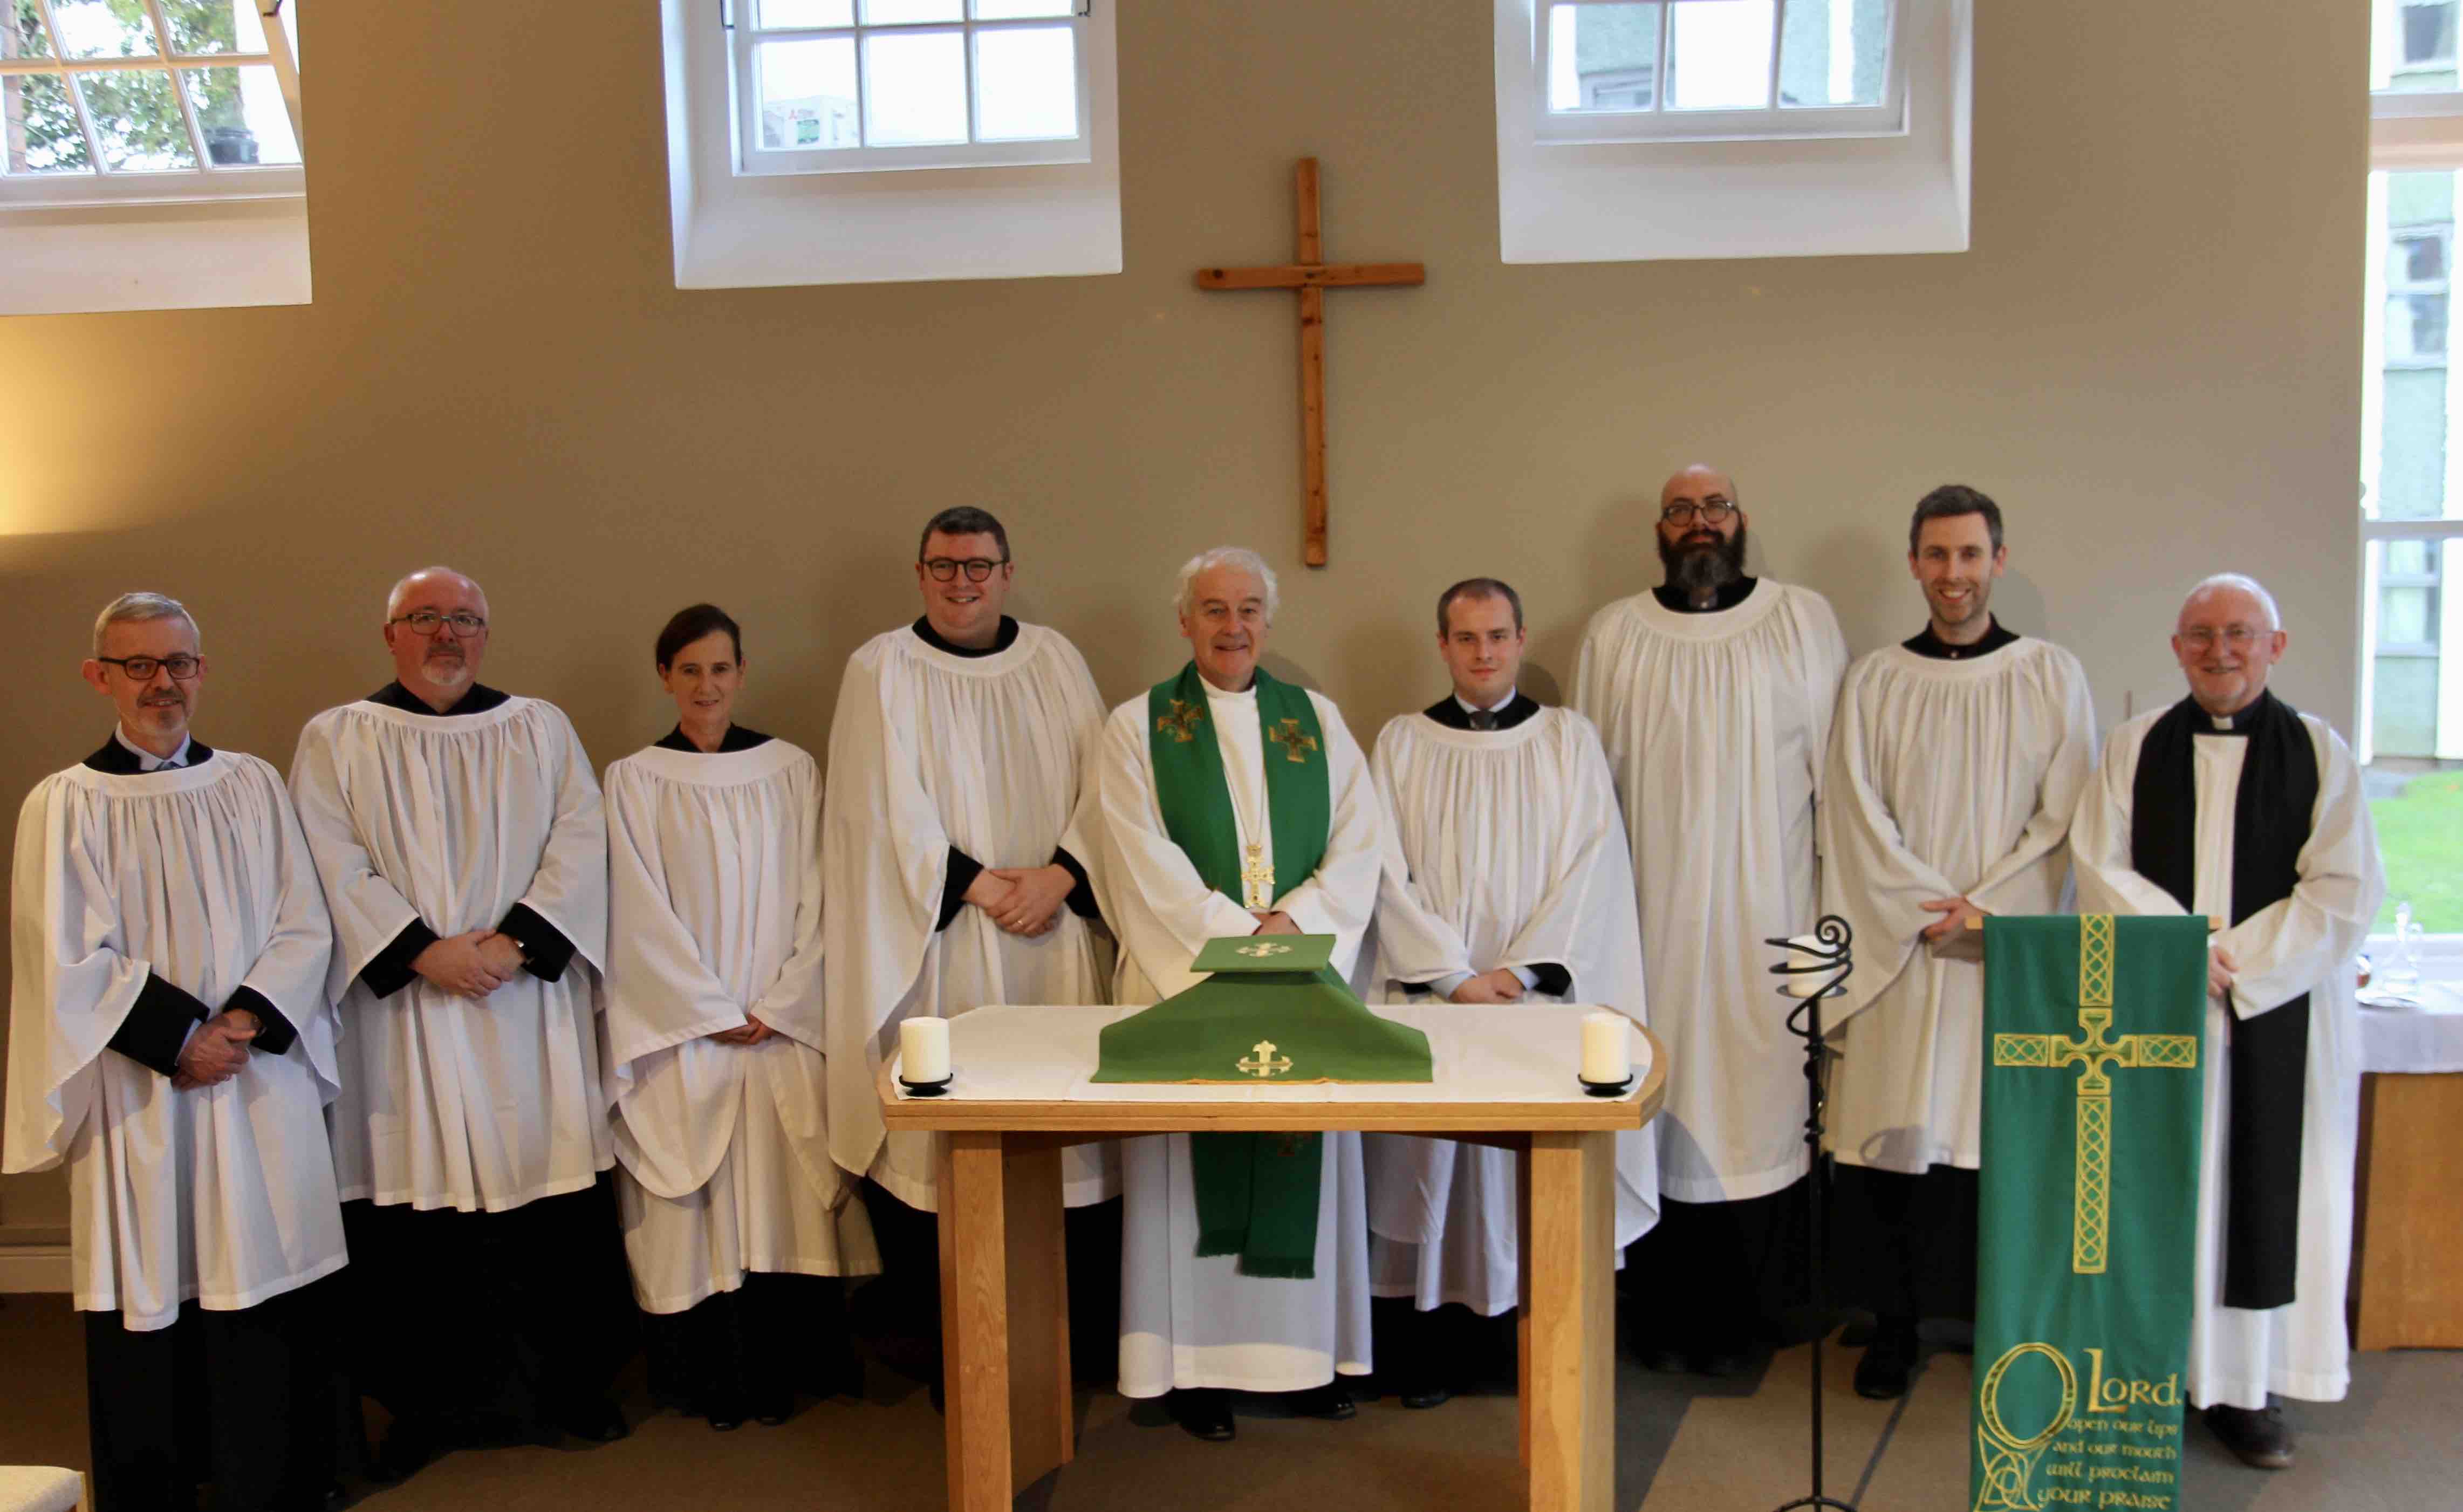 Archbishop Michael Jackson with the newly commissioned Student Readers and the Revd Dr Paddy McGlinchey.